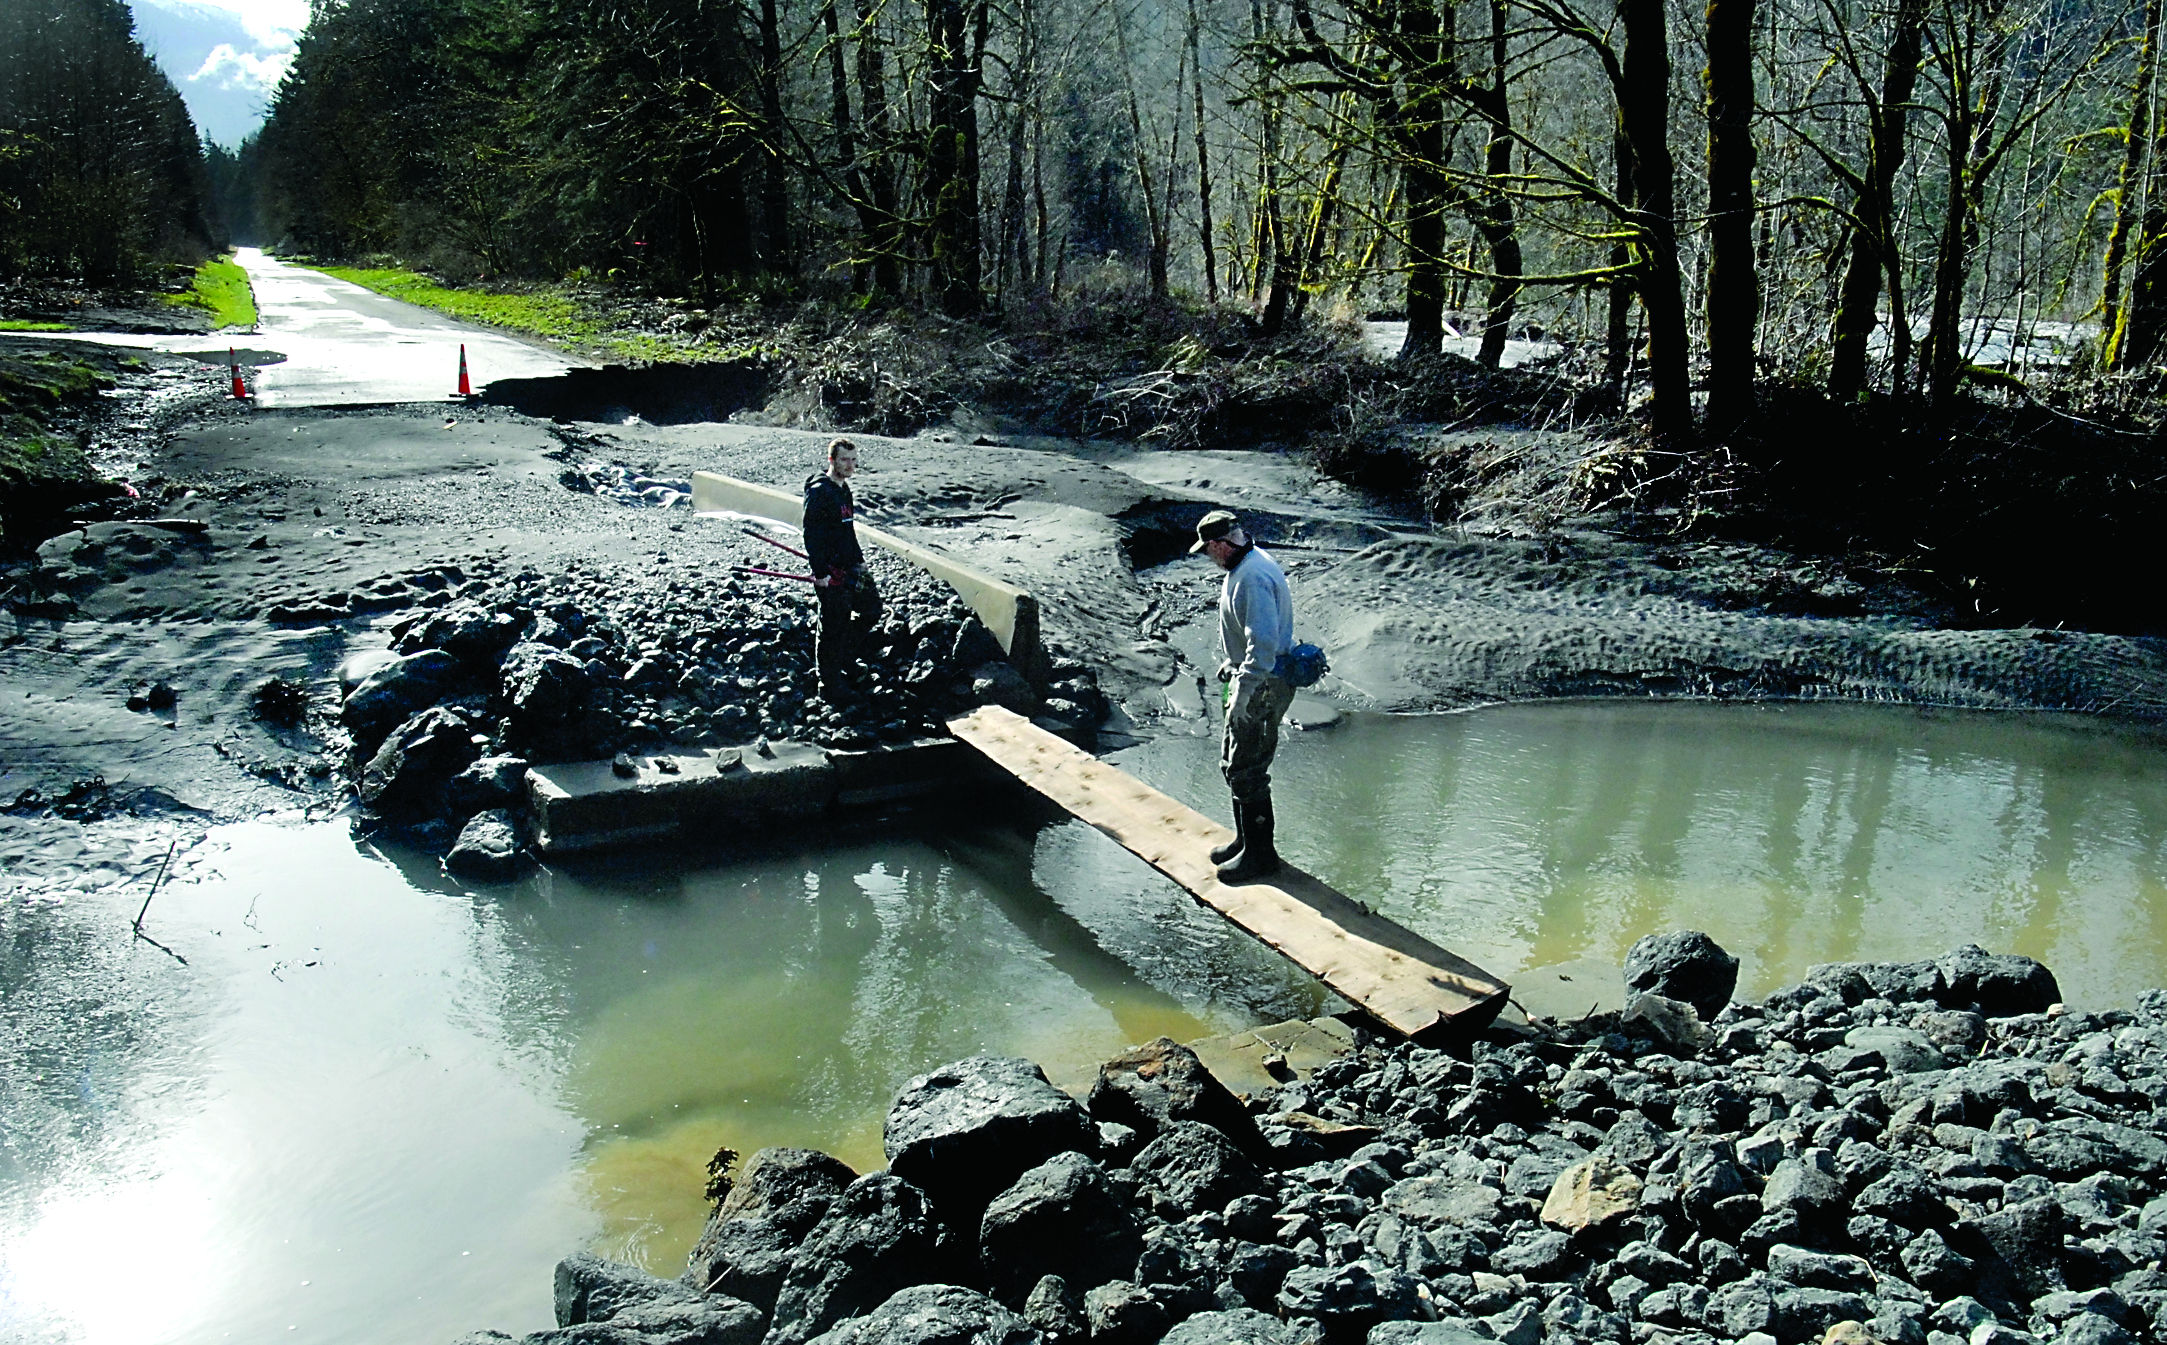 Olympic National Park chief electrician Robert Perina crosses a temporary plank bridge over a side channel of the Elwha River as electrician apprentice Kevan Keegan looks on near the Elwha Campground in Olympic National Park